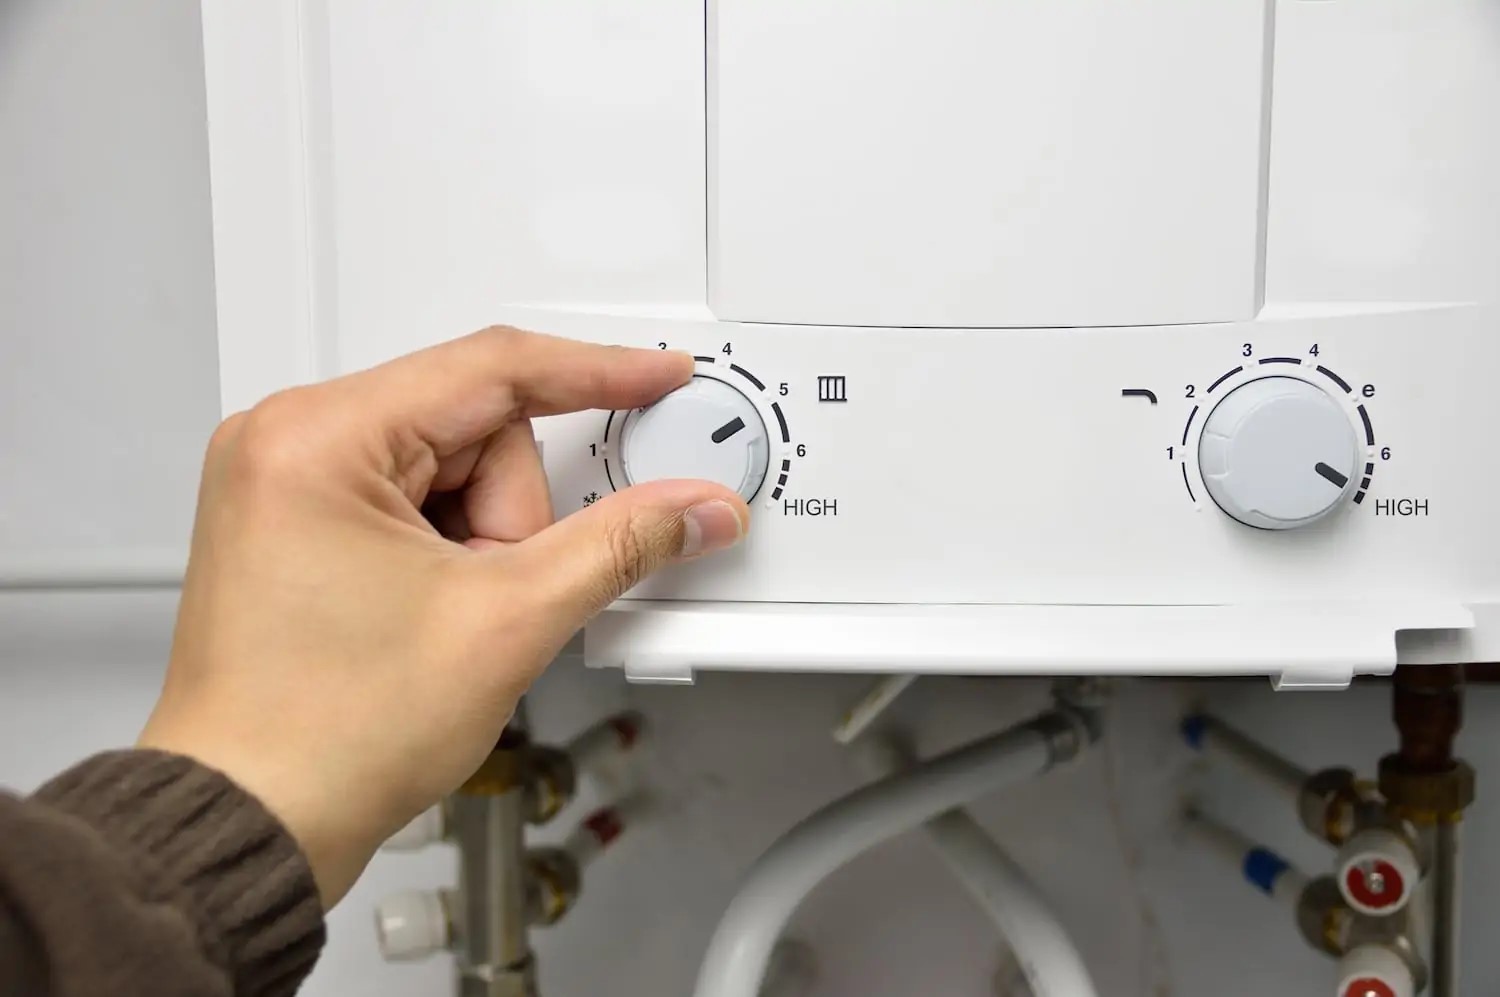 Person adjusting temperature setting on a tankless water heater